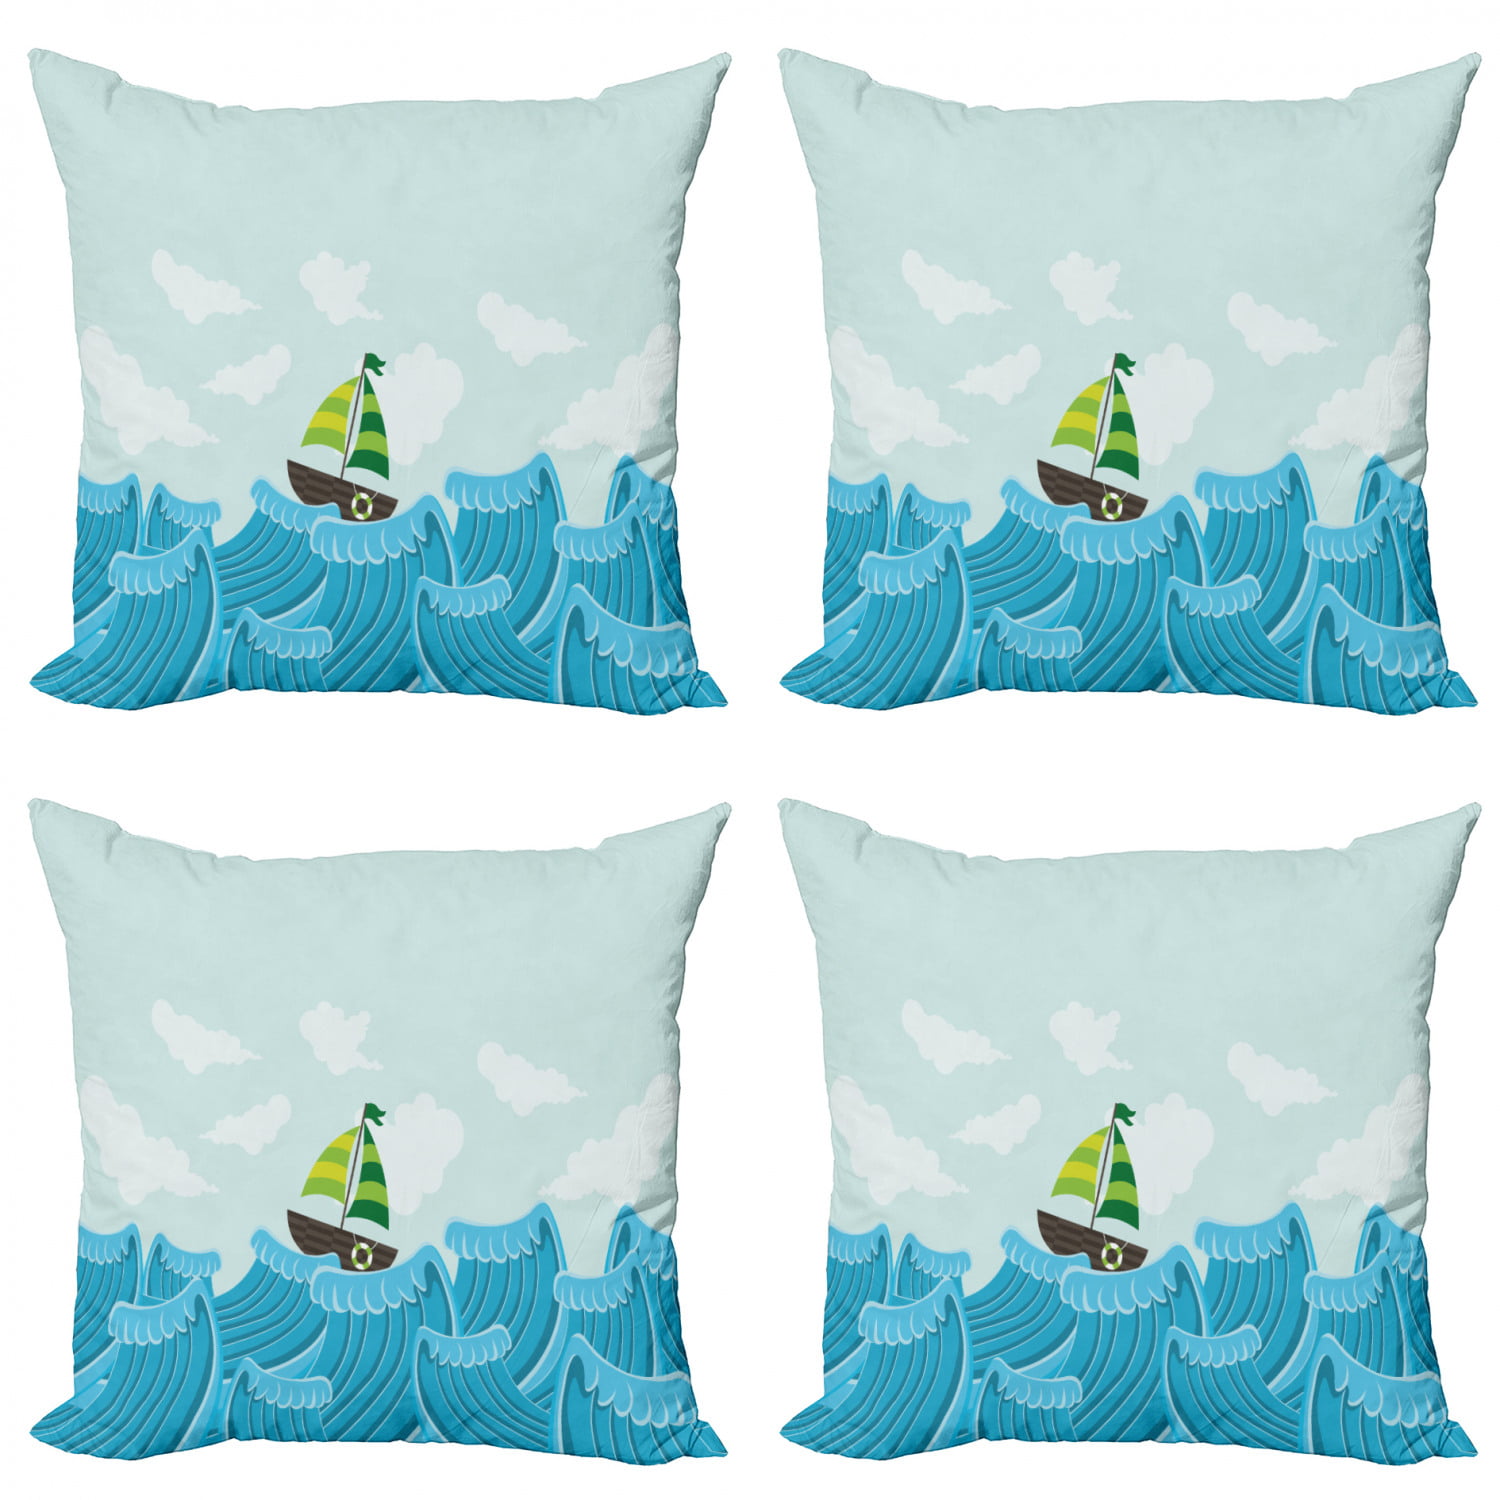 All Smiles Fun Ocean Throw Pillow Covers for Cute Kids & You Sea Home Decor Blue Coastal Cushion Cases 18x18 Nautical Decorative Pillowcases Set of 4 for Couch Bed Sofa 